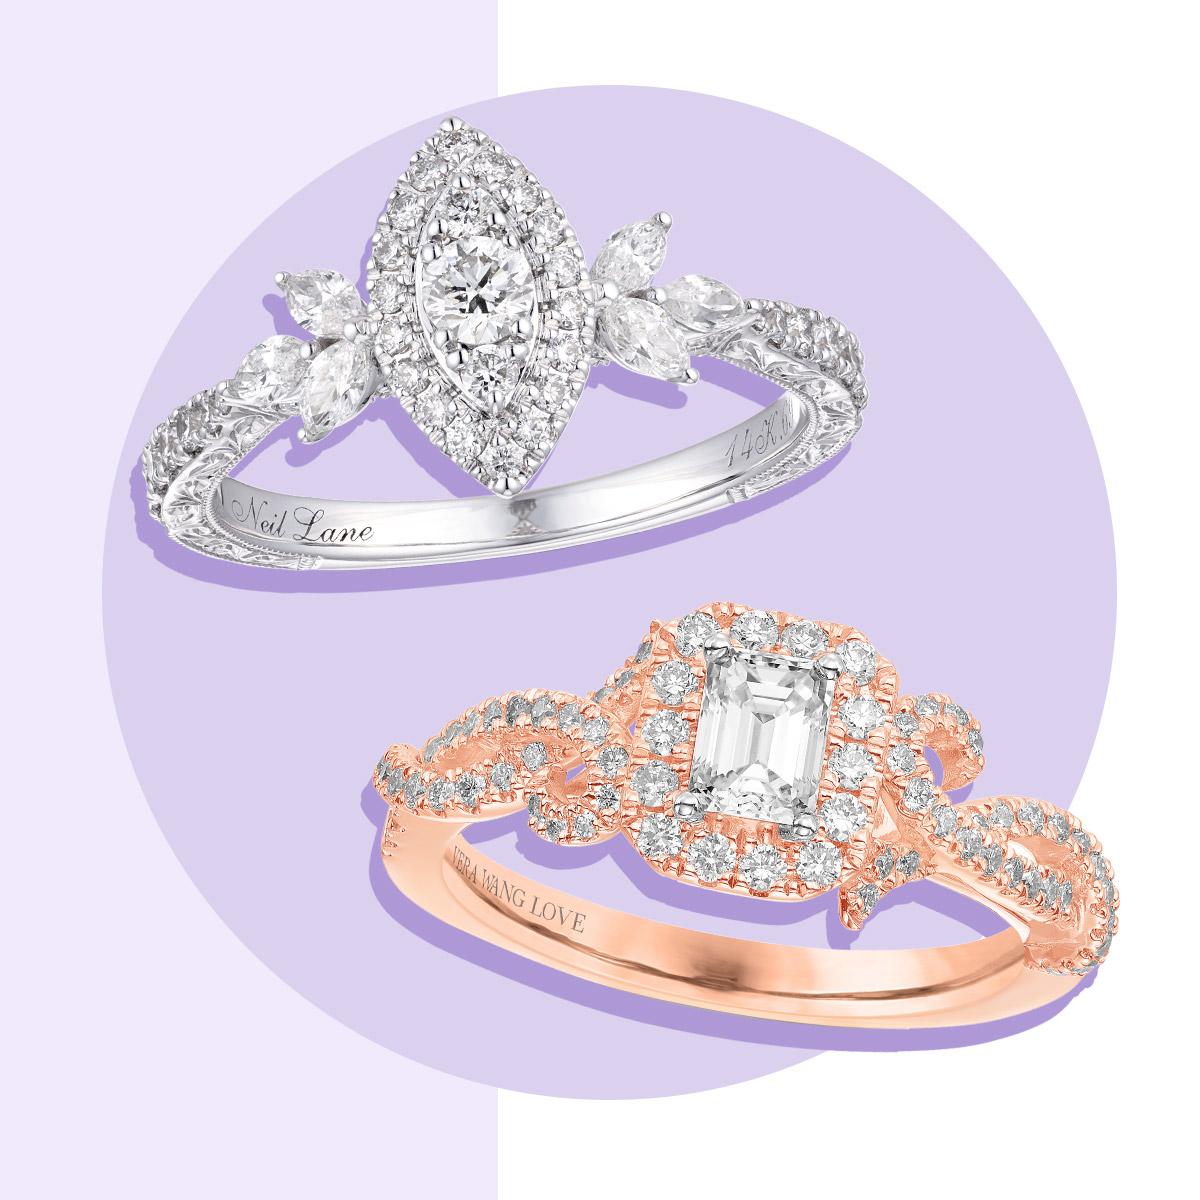 Halo engagement rings